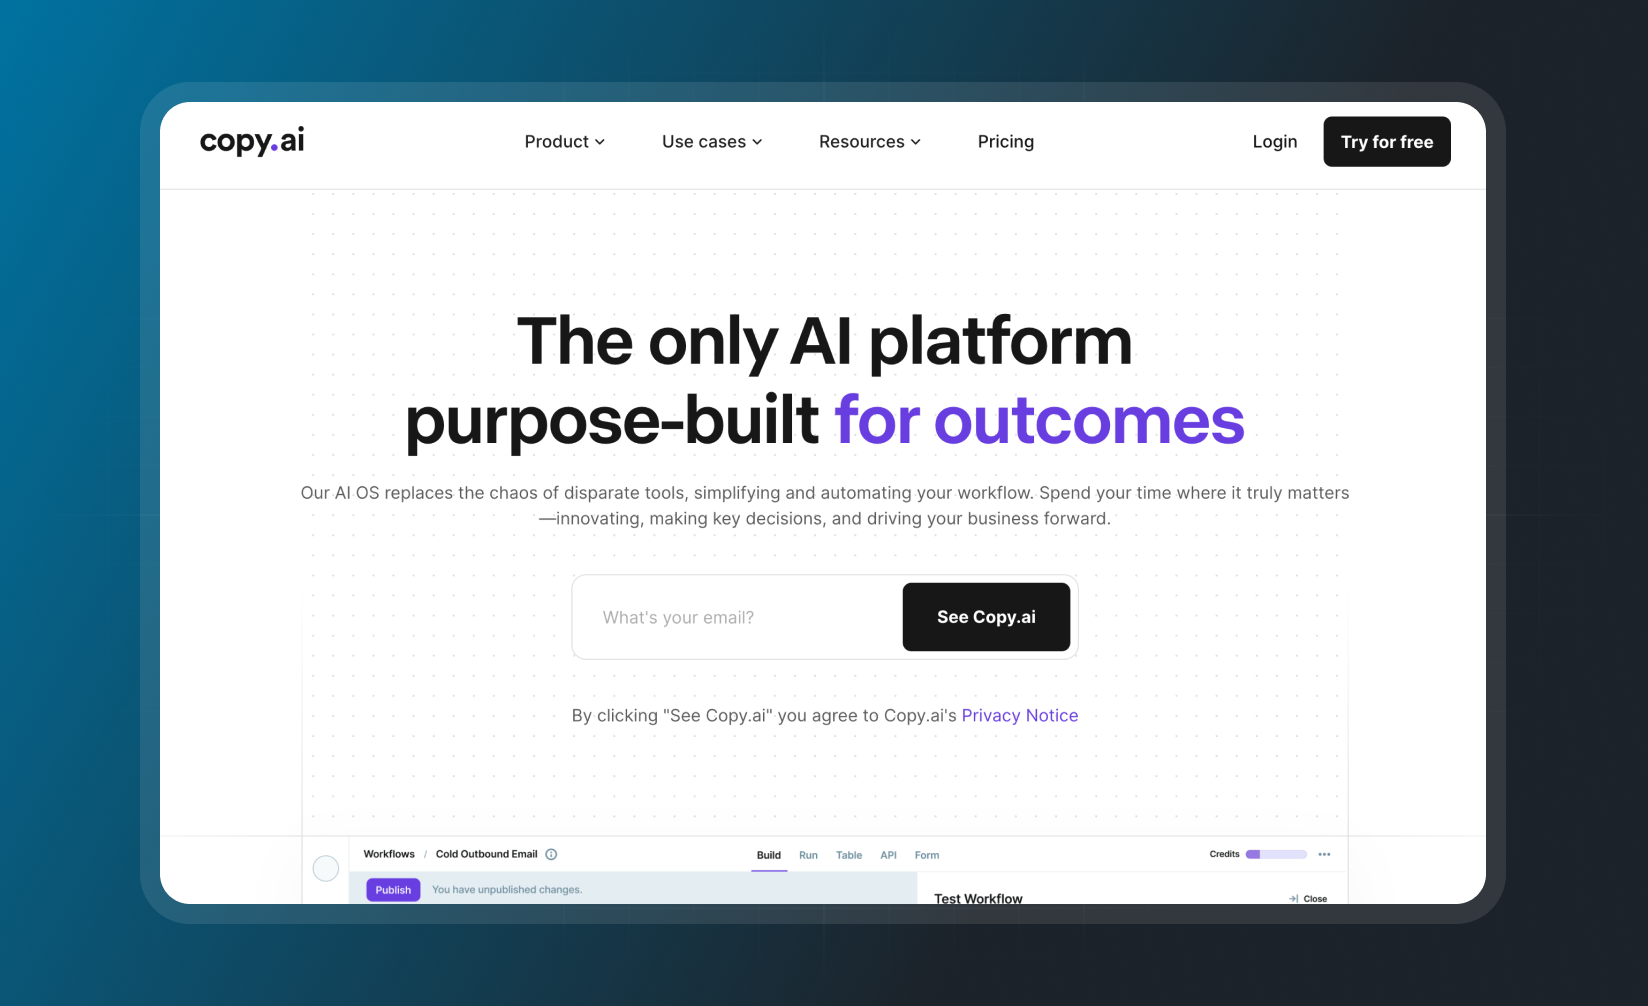 best ai tools for business